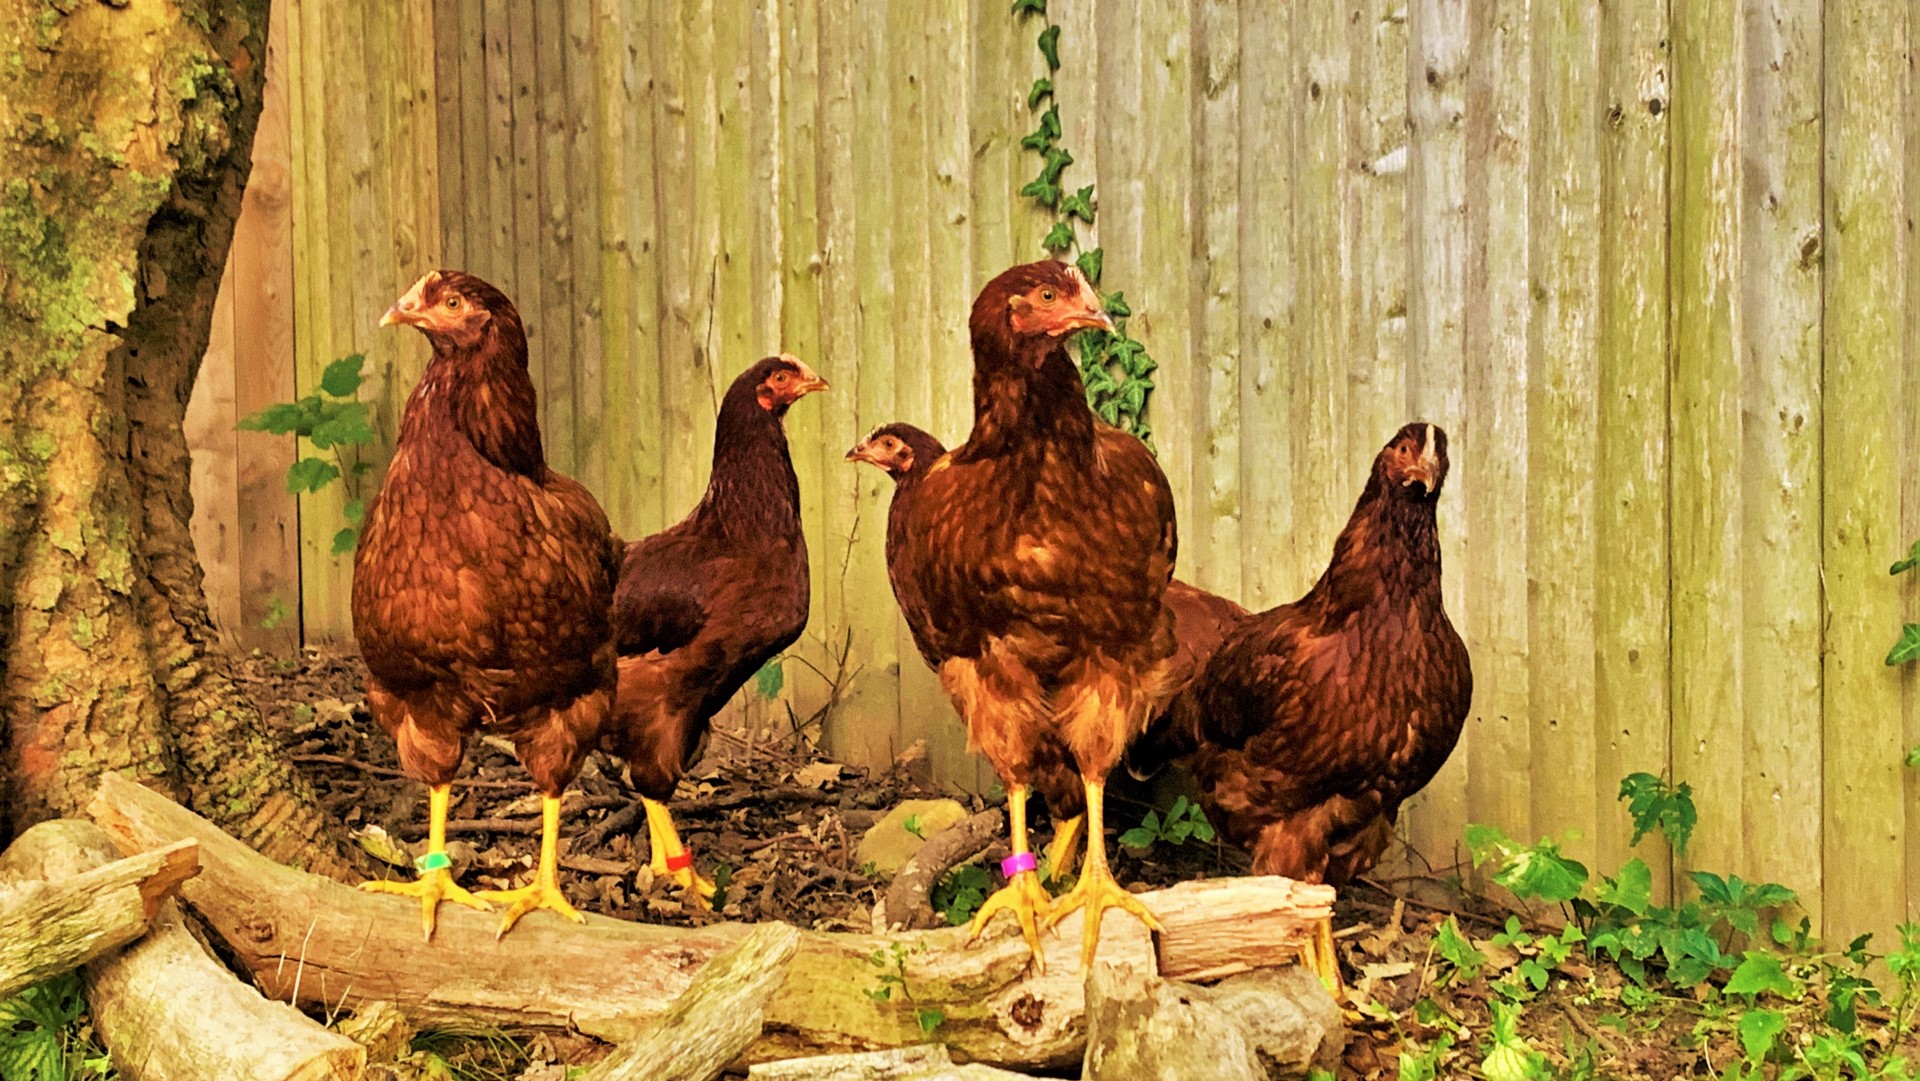 Should I Insulate the Chicken Coop? - The Pioneer Chicks